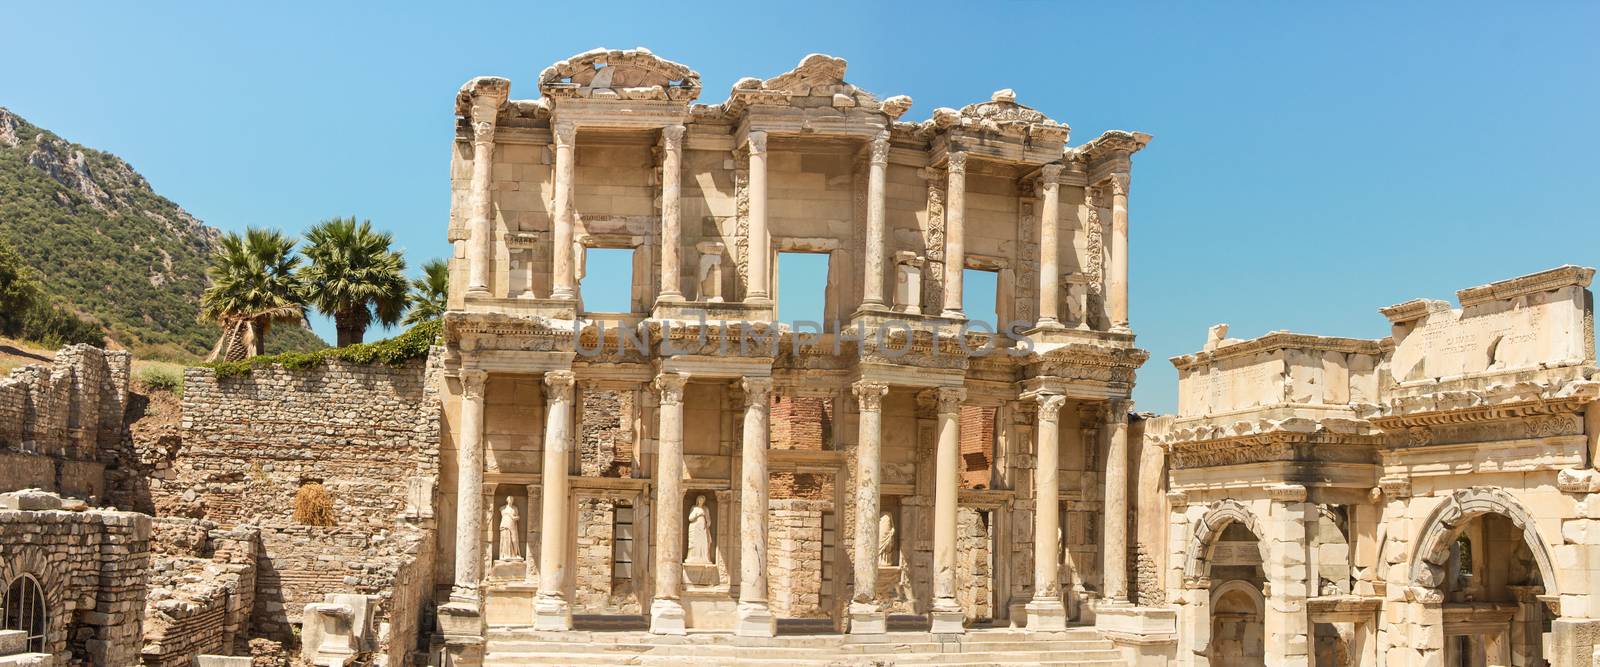 The ancient library of Ephesus in Turkey